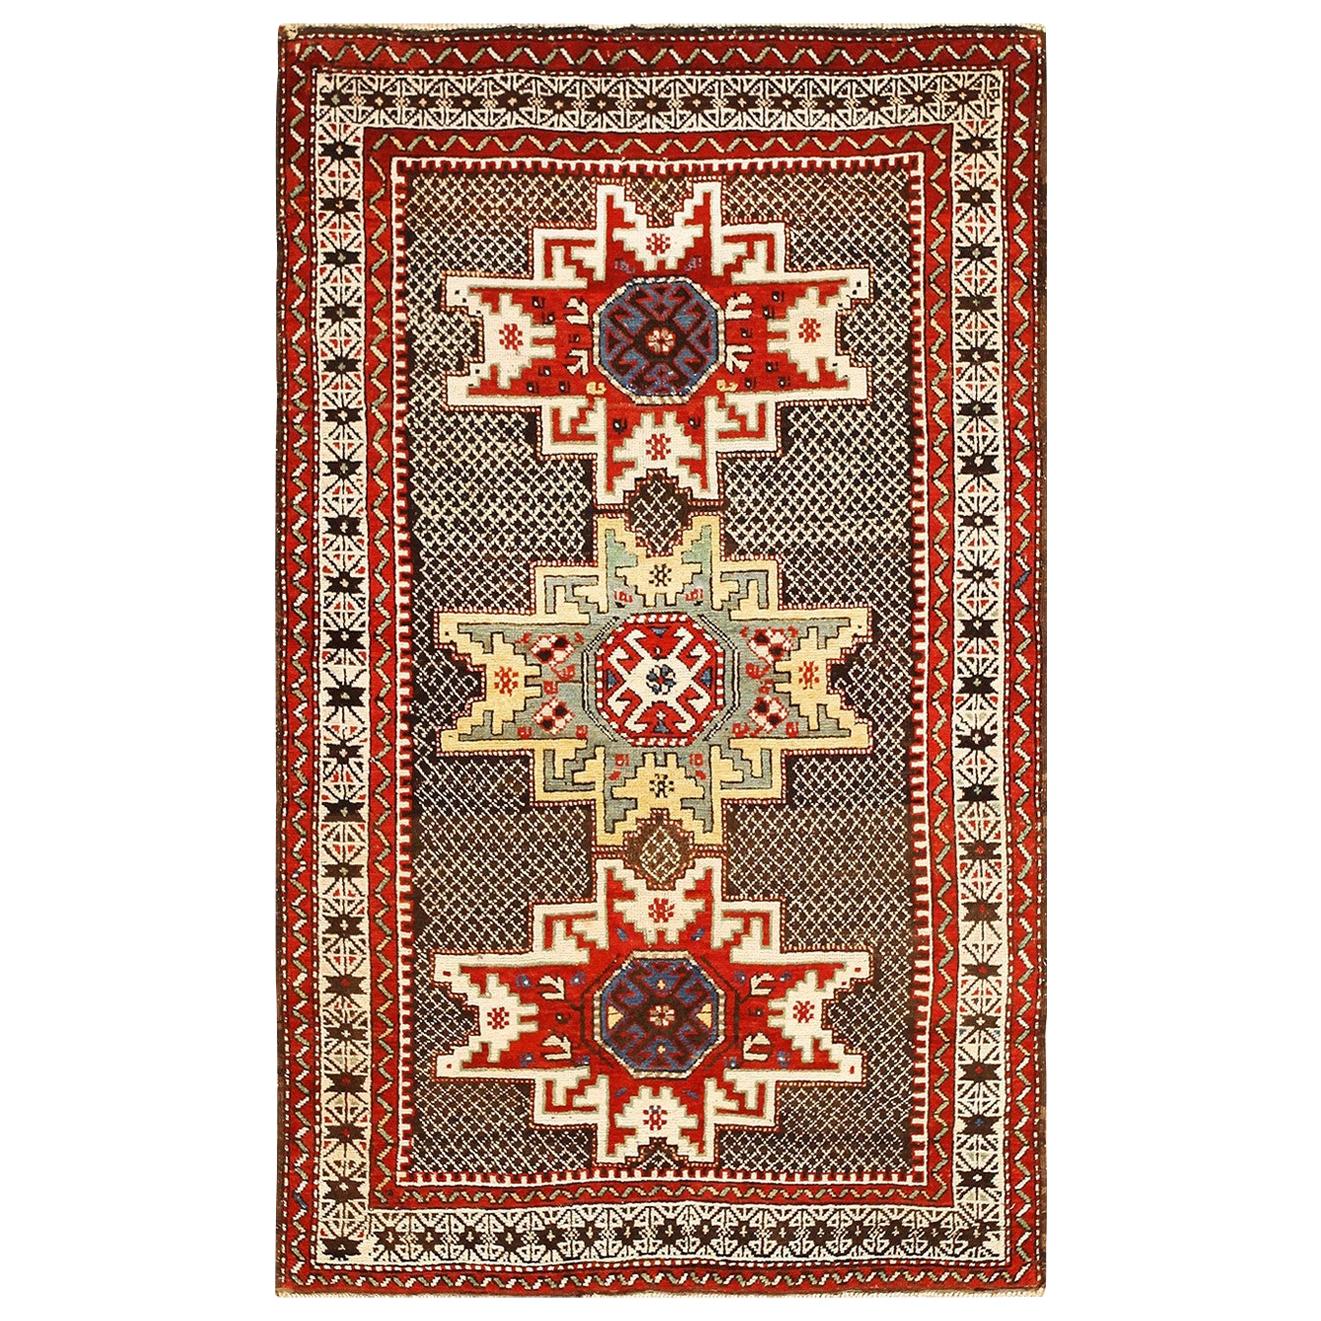 Small Tribal Antique Caucasian Kuba Rug. Size: 3 ft 6 in x 5 ft 6 in